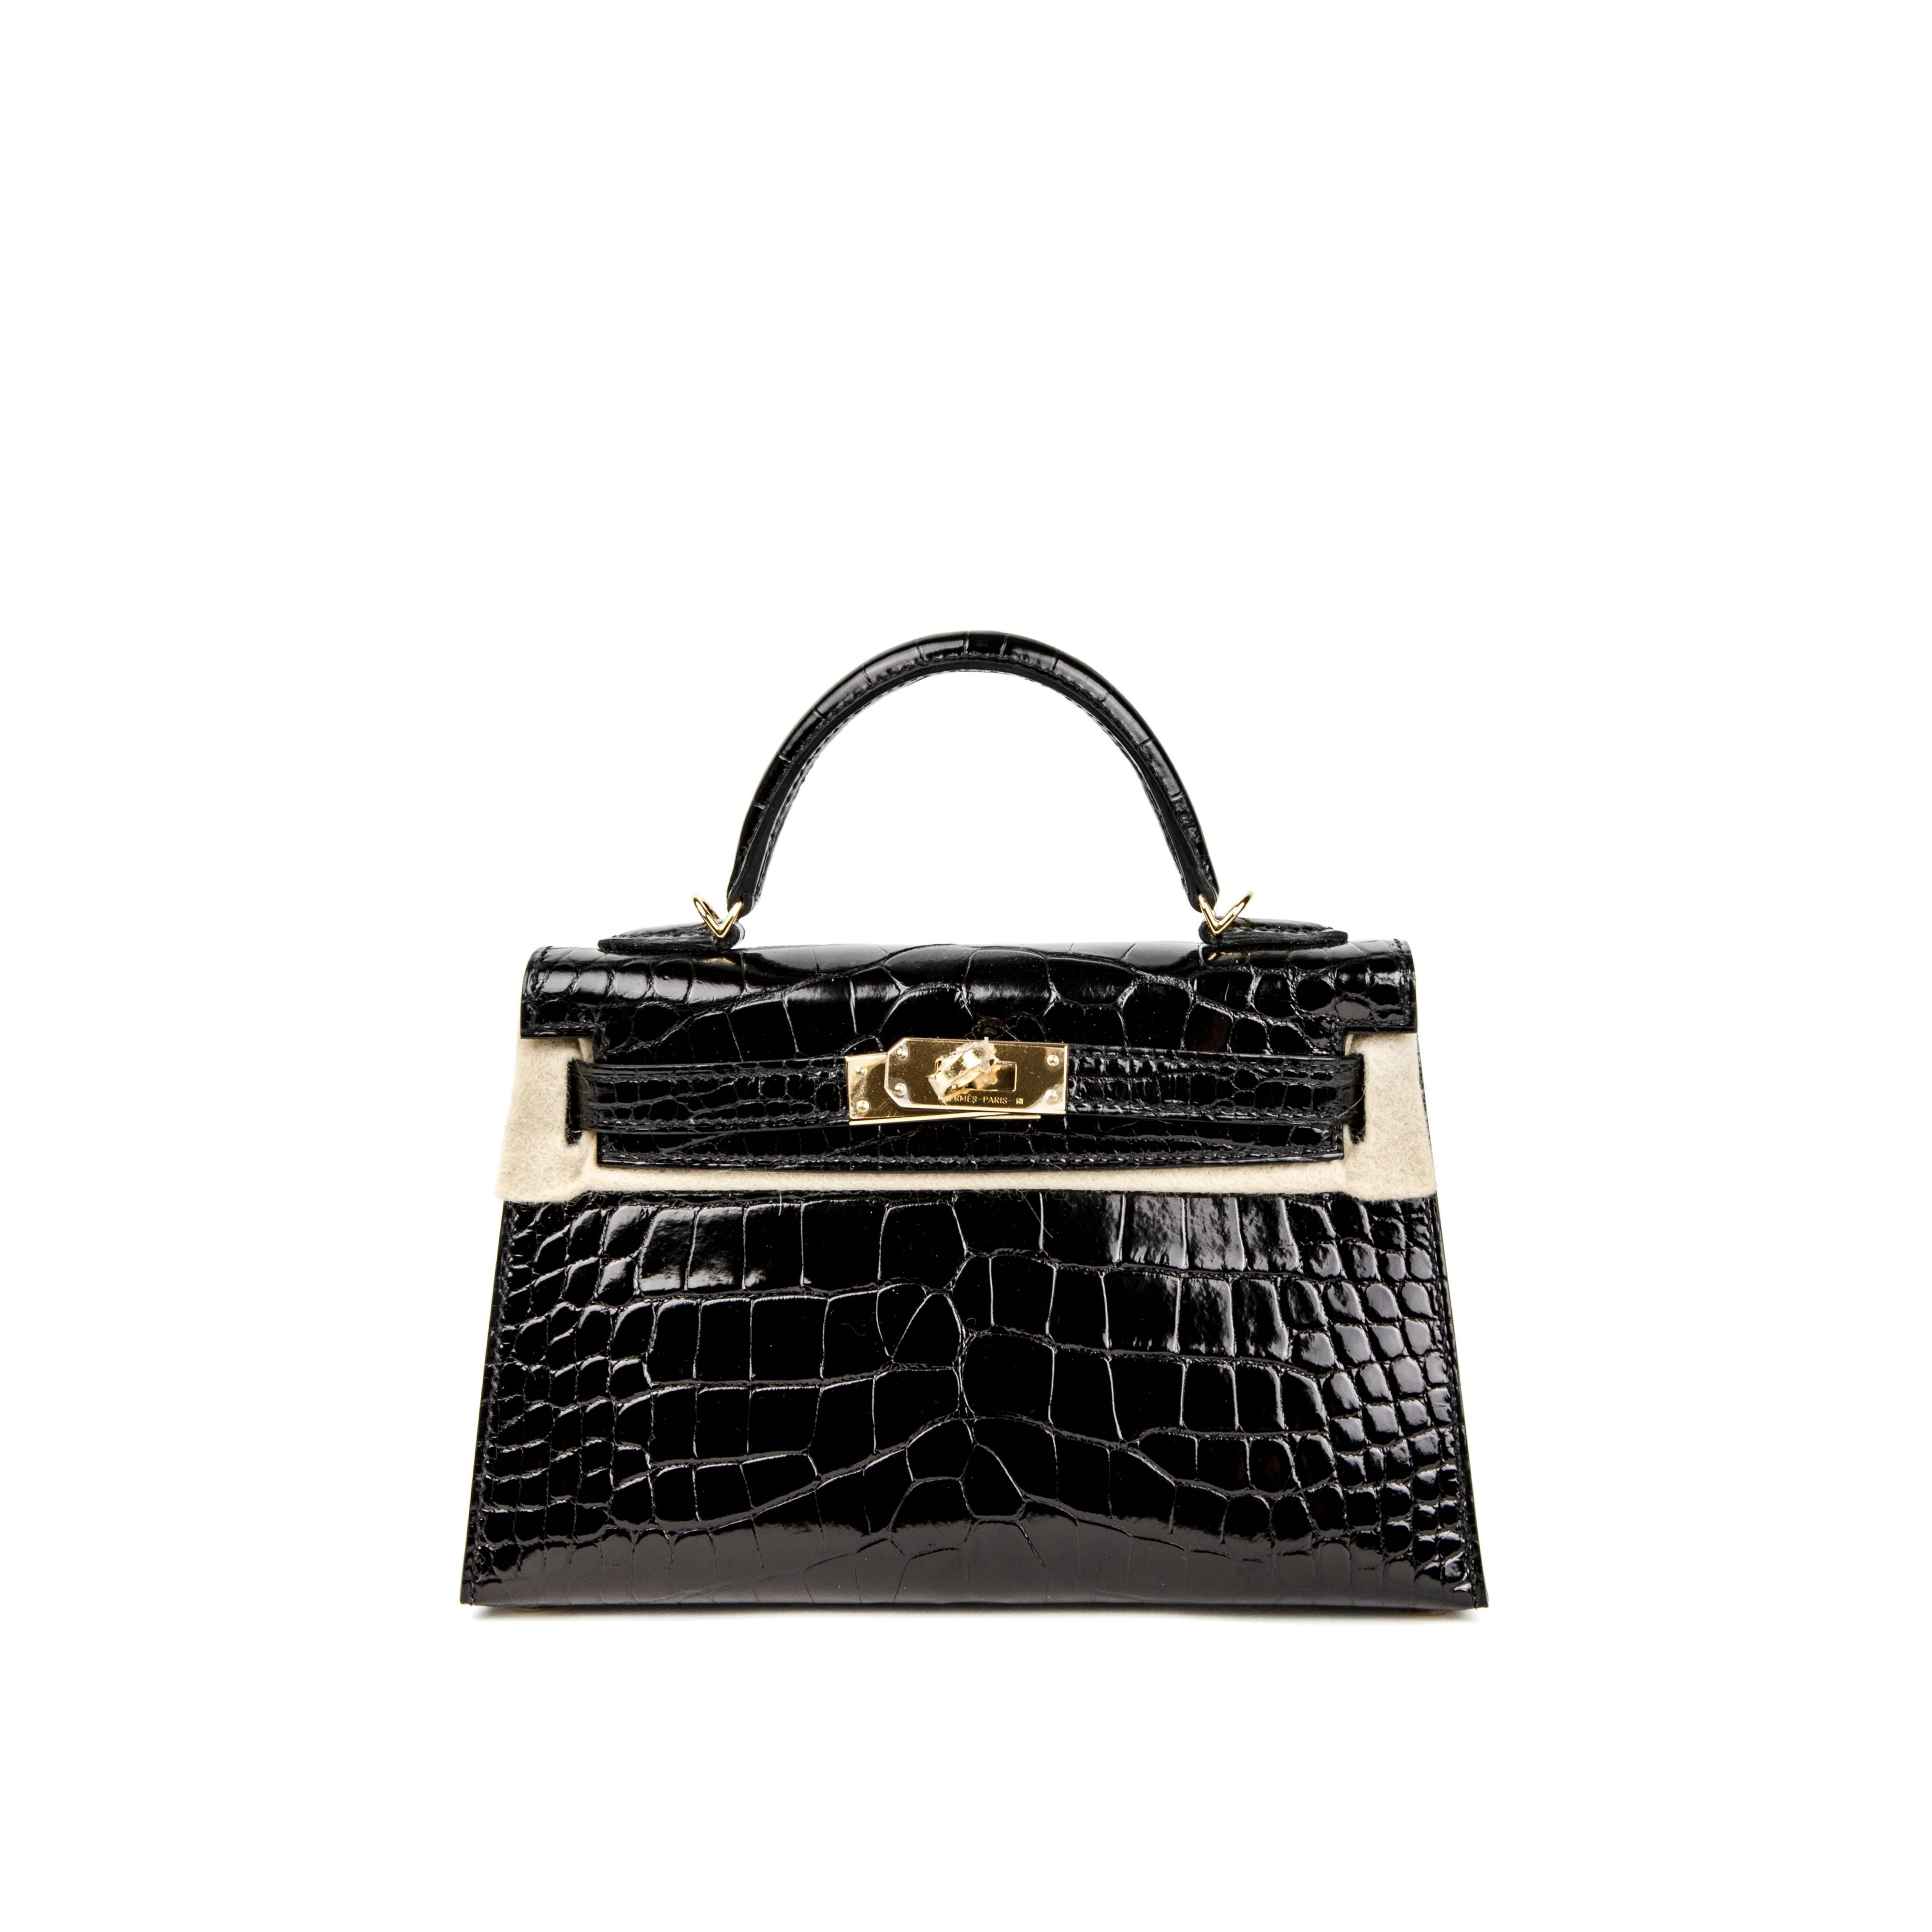 Brand New, fresh from store and never worn Hermes Mini Kelly 20 cm purse, in chick and elegant classic Black Color and Alligator Mississippiensis Shiny Leather. This nice piece has Gold hardware (GHW). The Kelly Handbag has been just picked up at